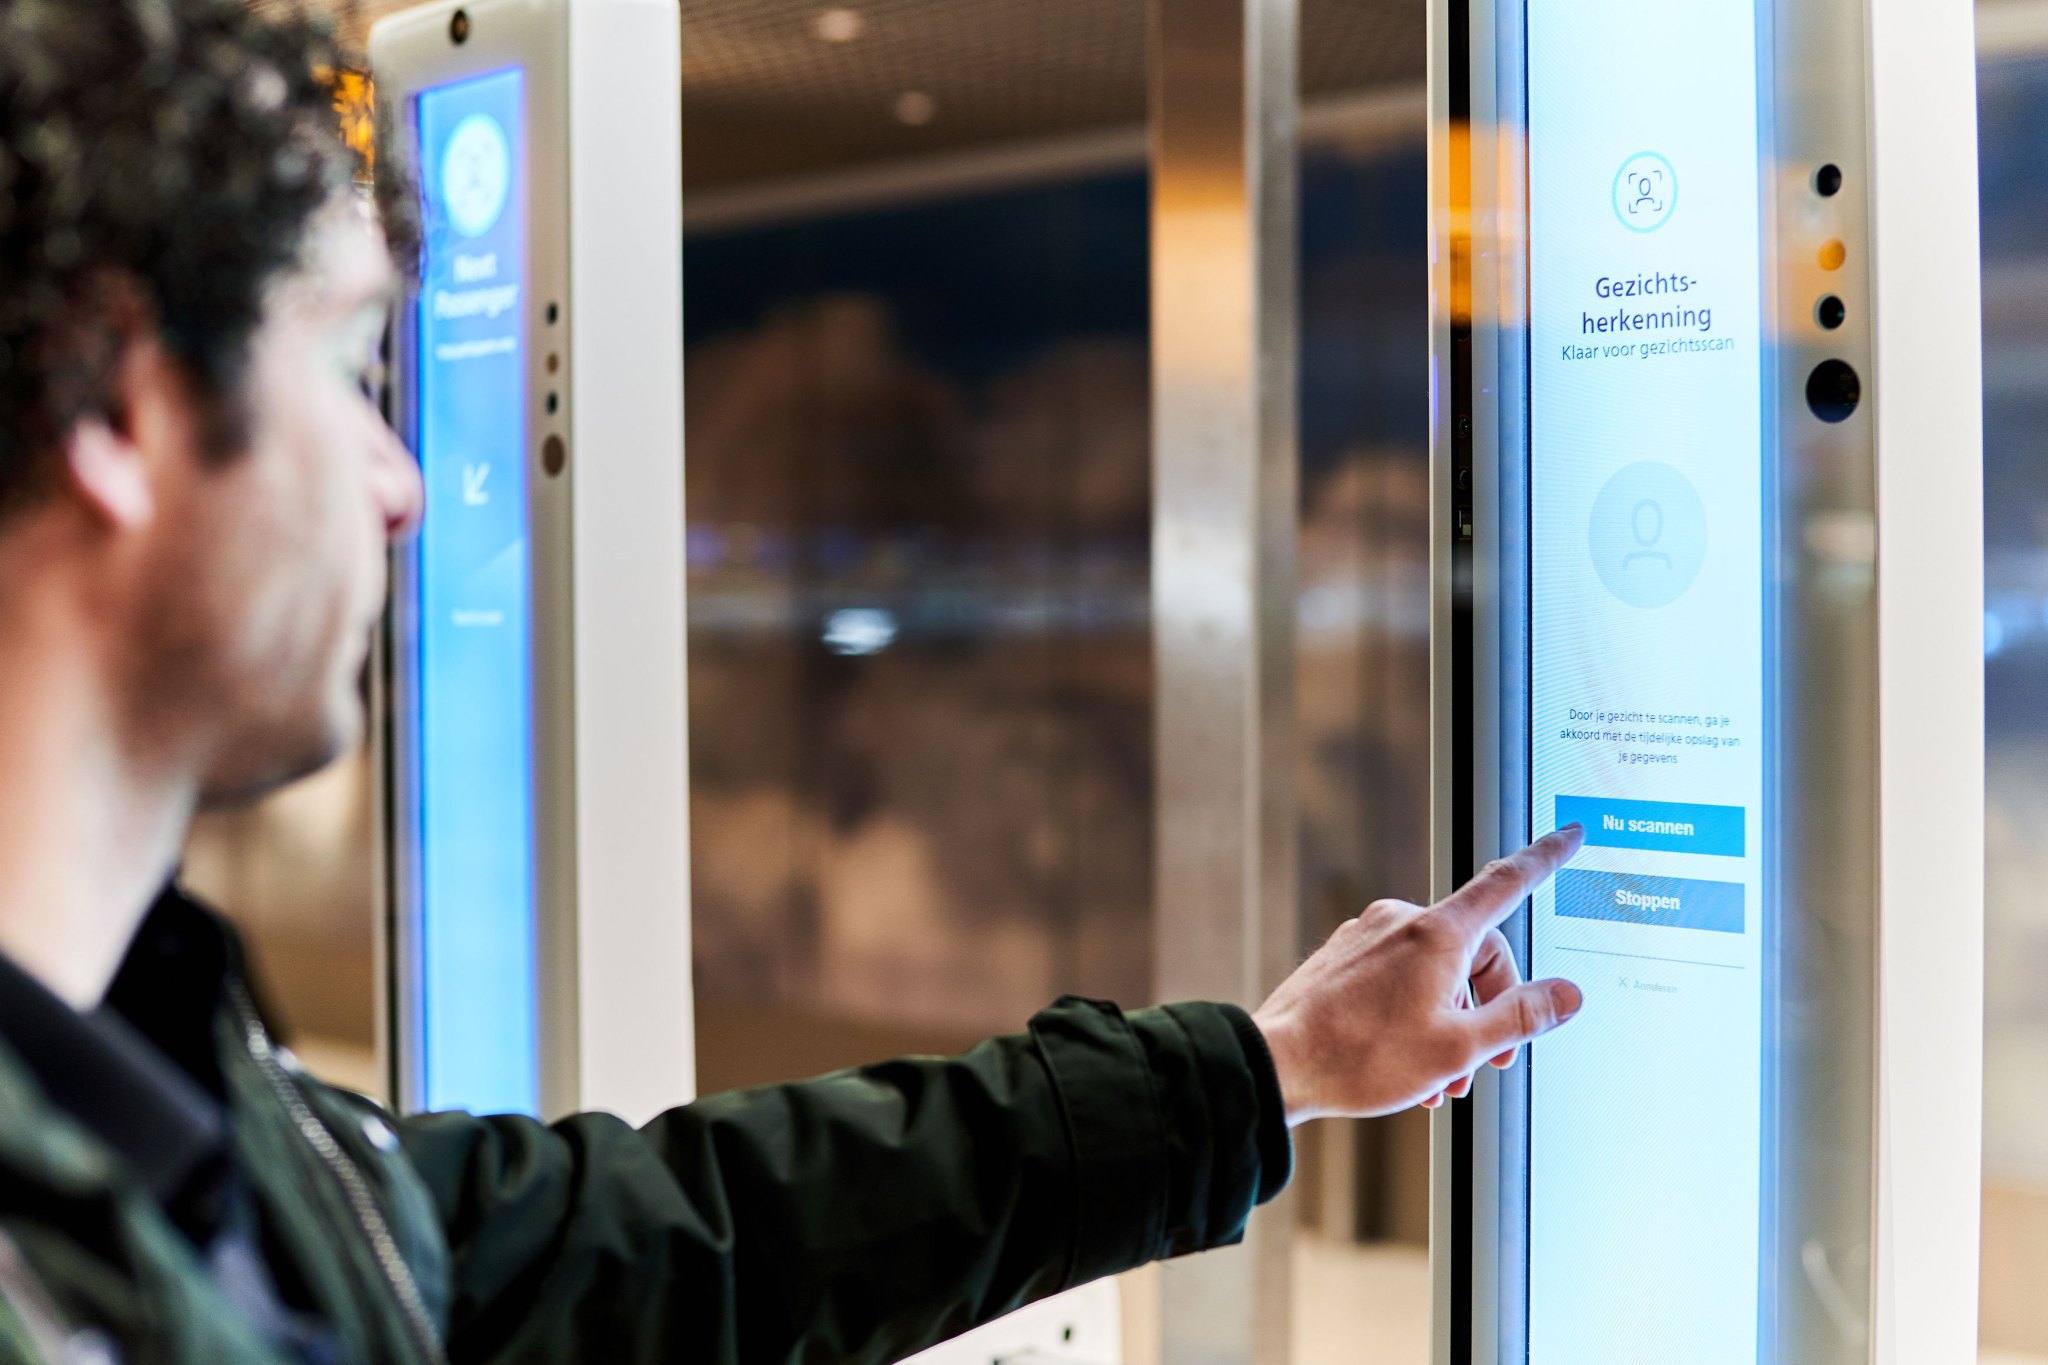 facial-recognition-boarding-Amsterdam-Airport-Schiphol 4